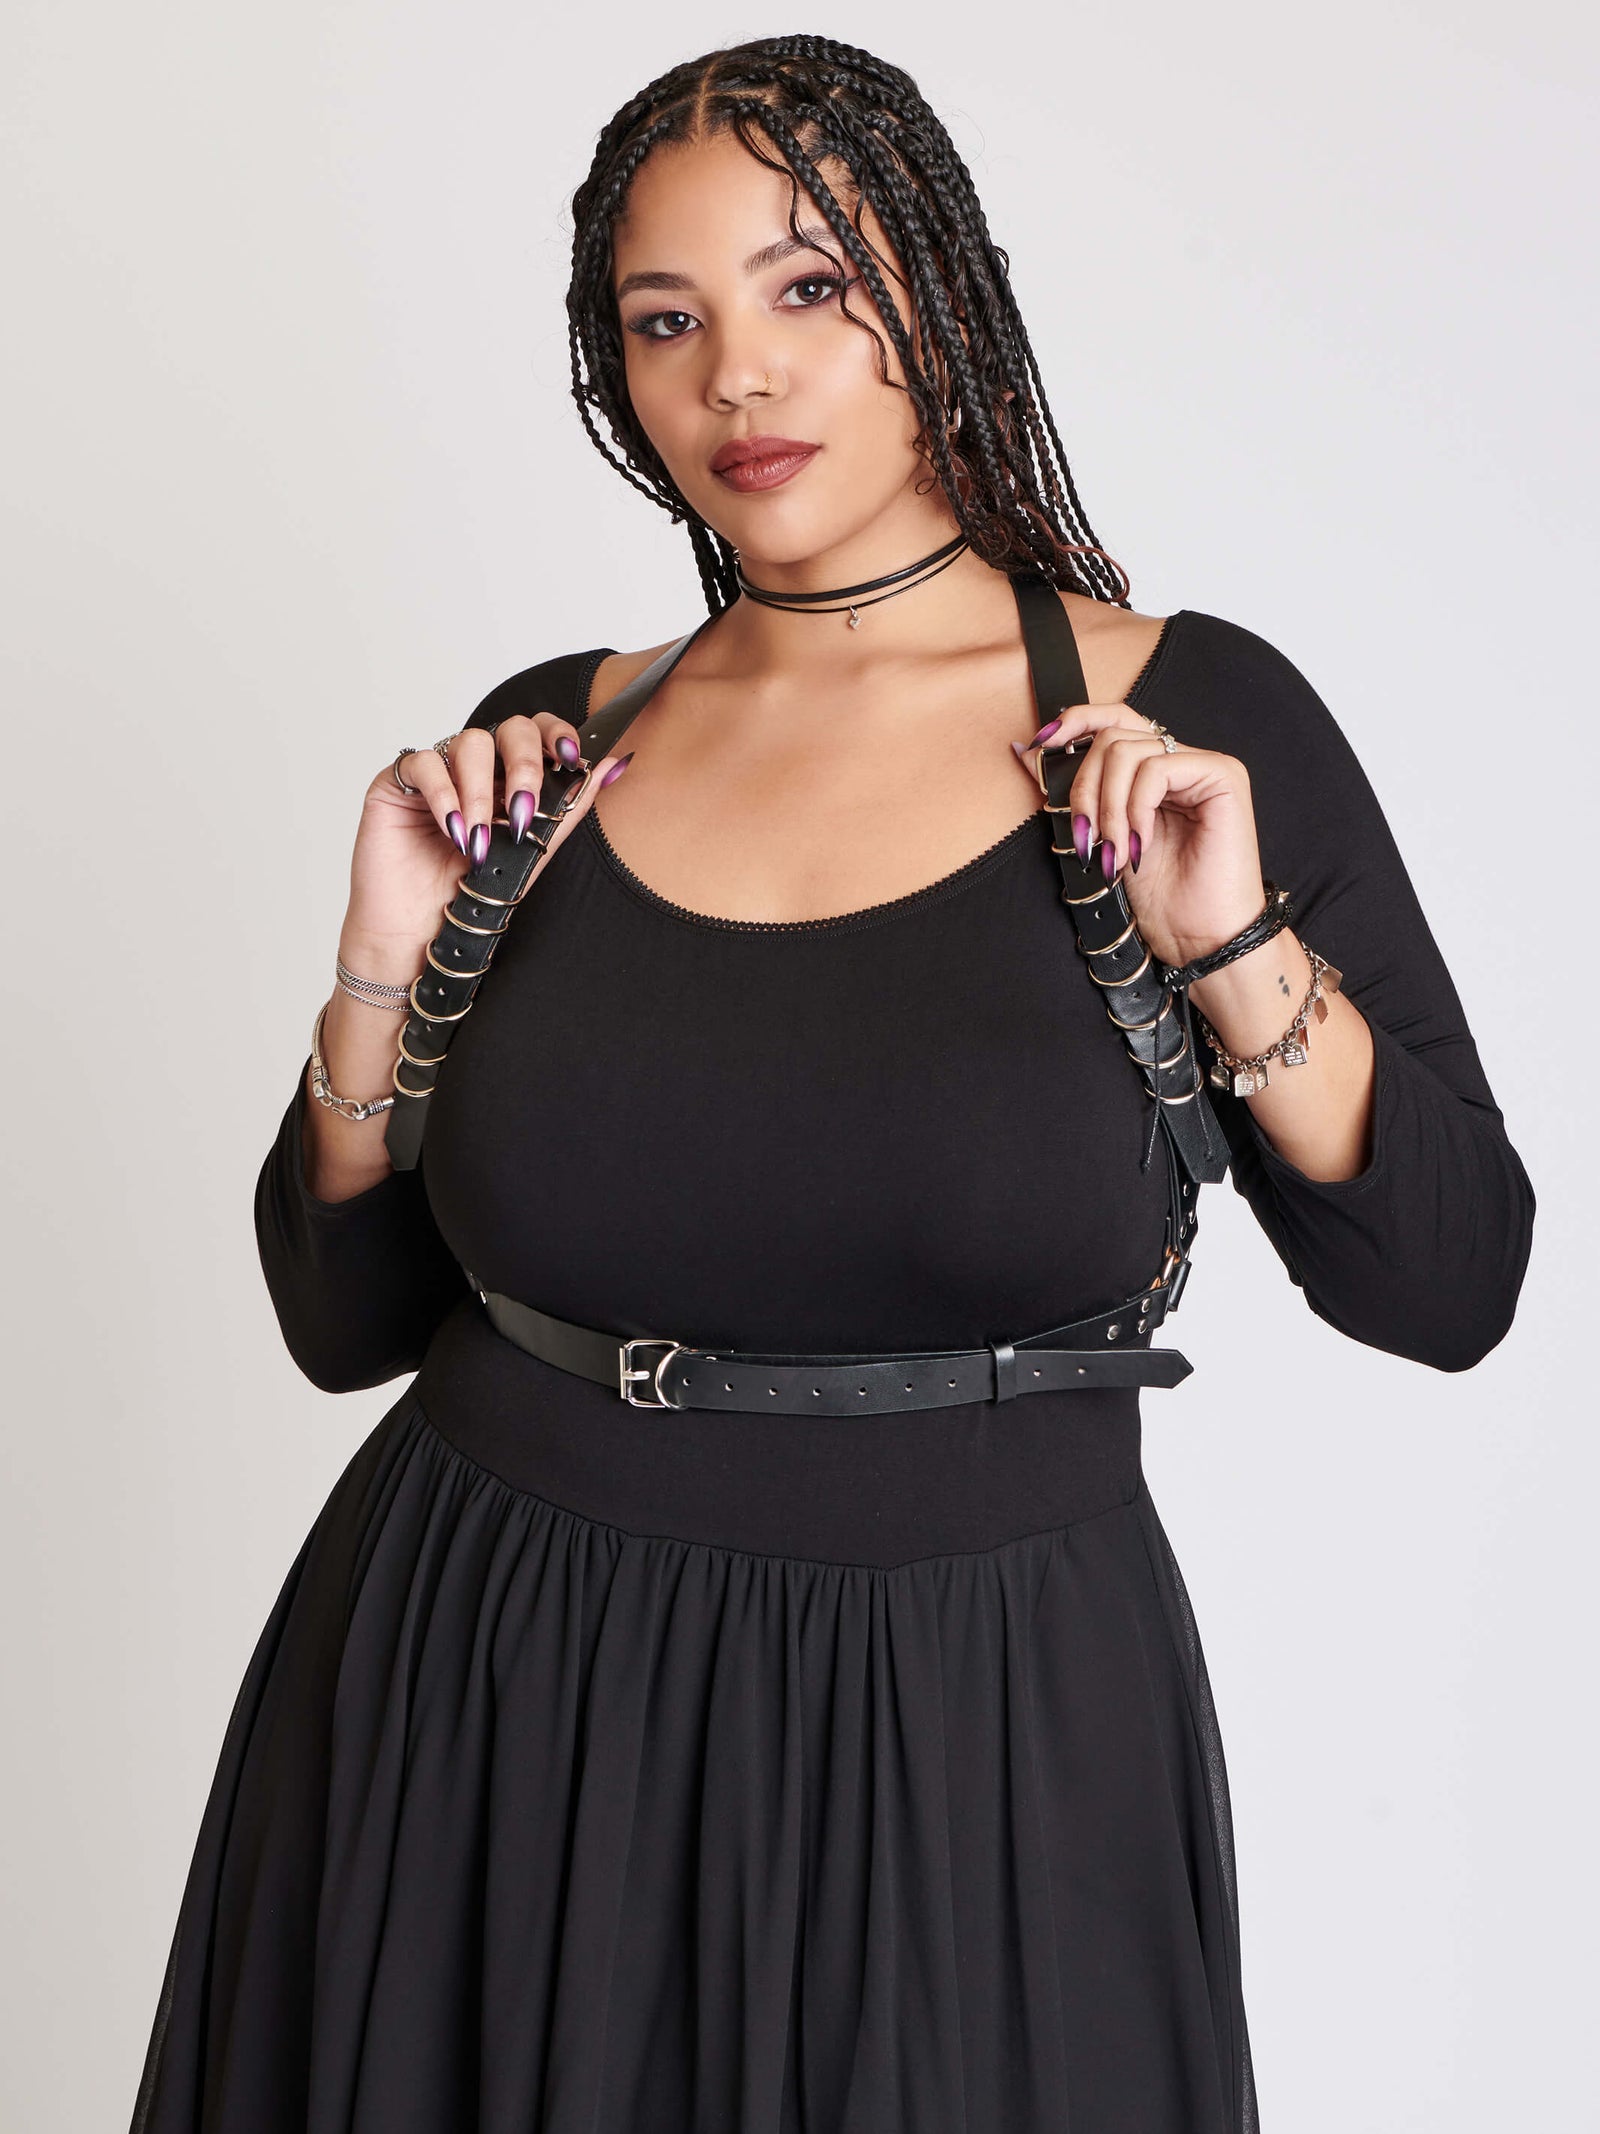 Goth Plus Size Belts and Harnesses